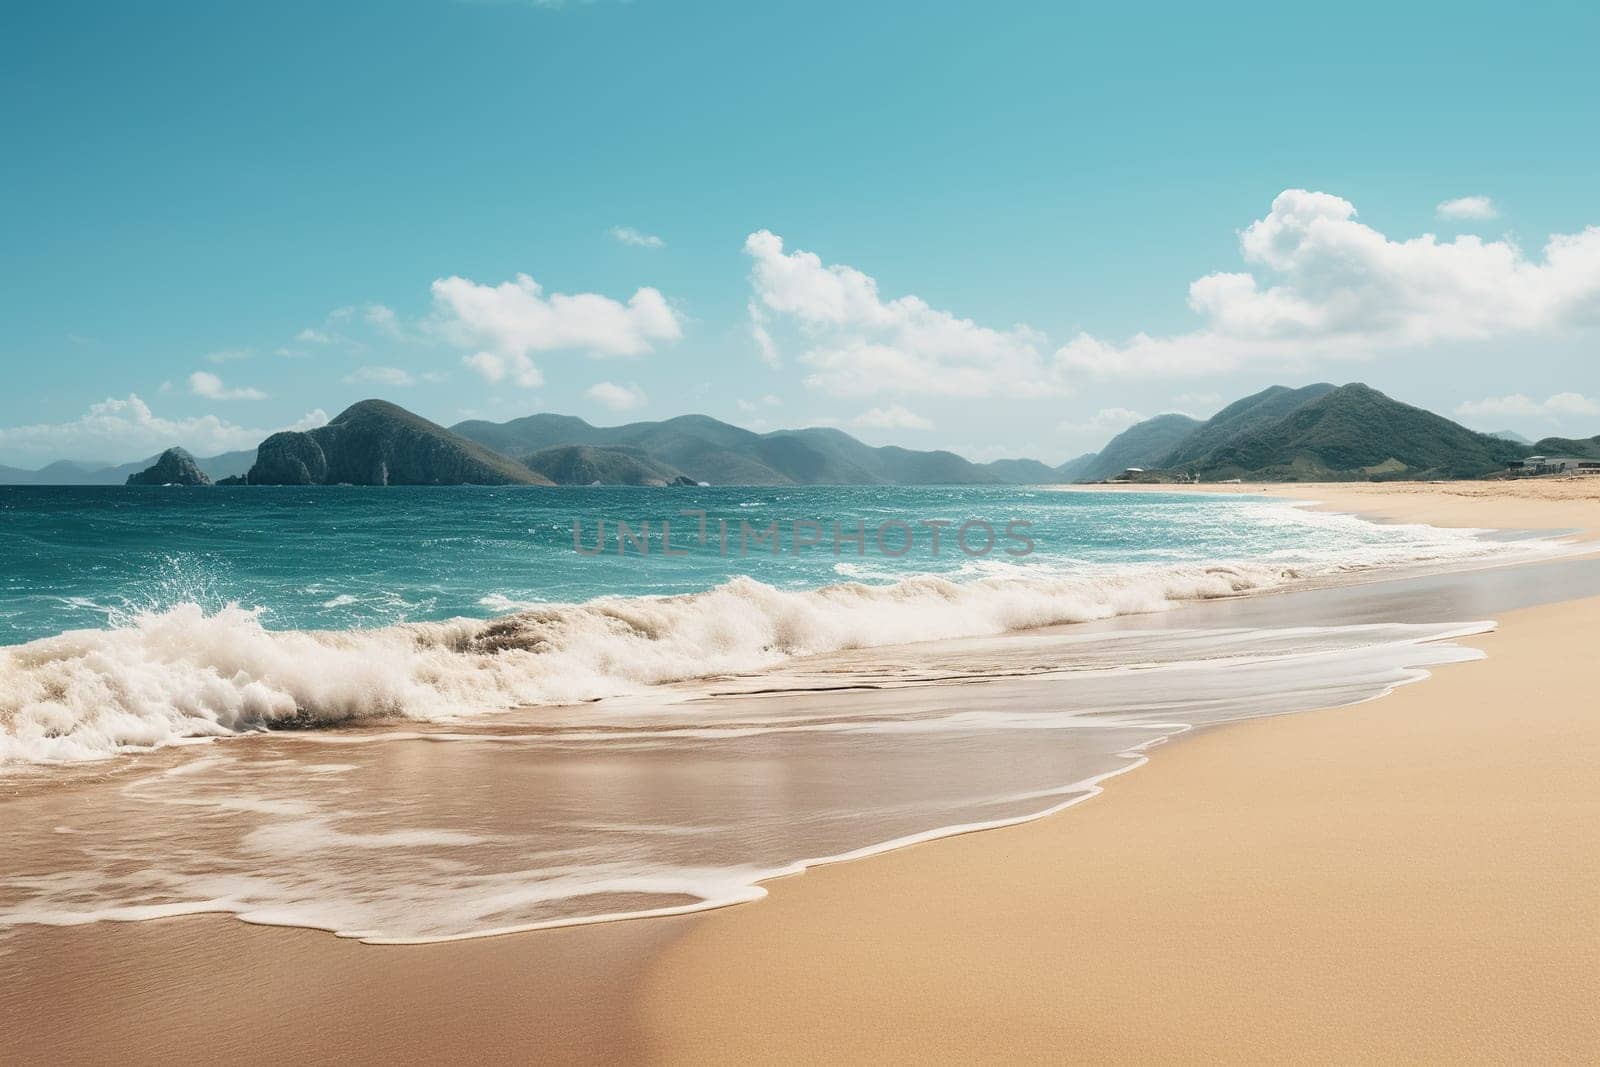 Seascape with empty beach, mountains and beautiful blue water. Vacation, travel, beach holiday concept. Generated by artificial intelligence by Vovmar